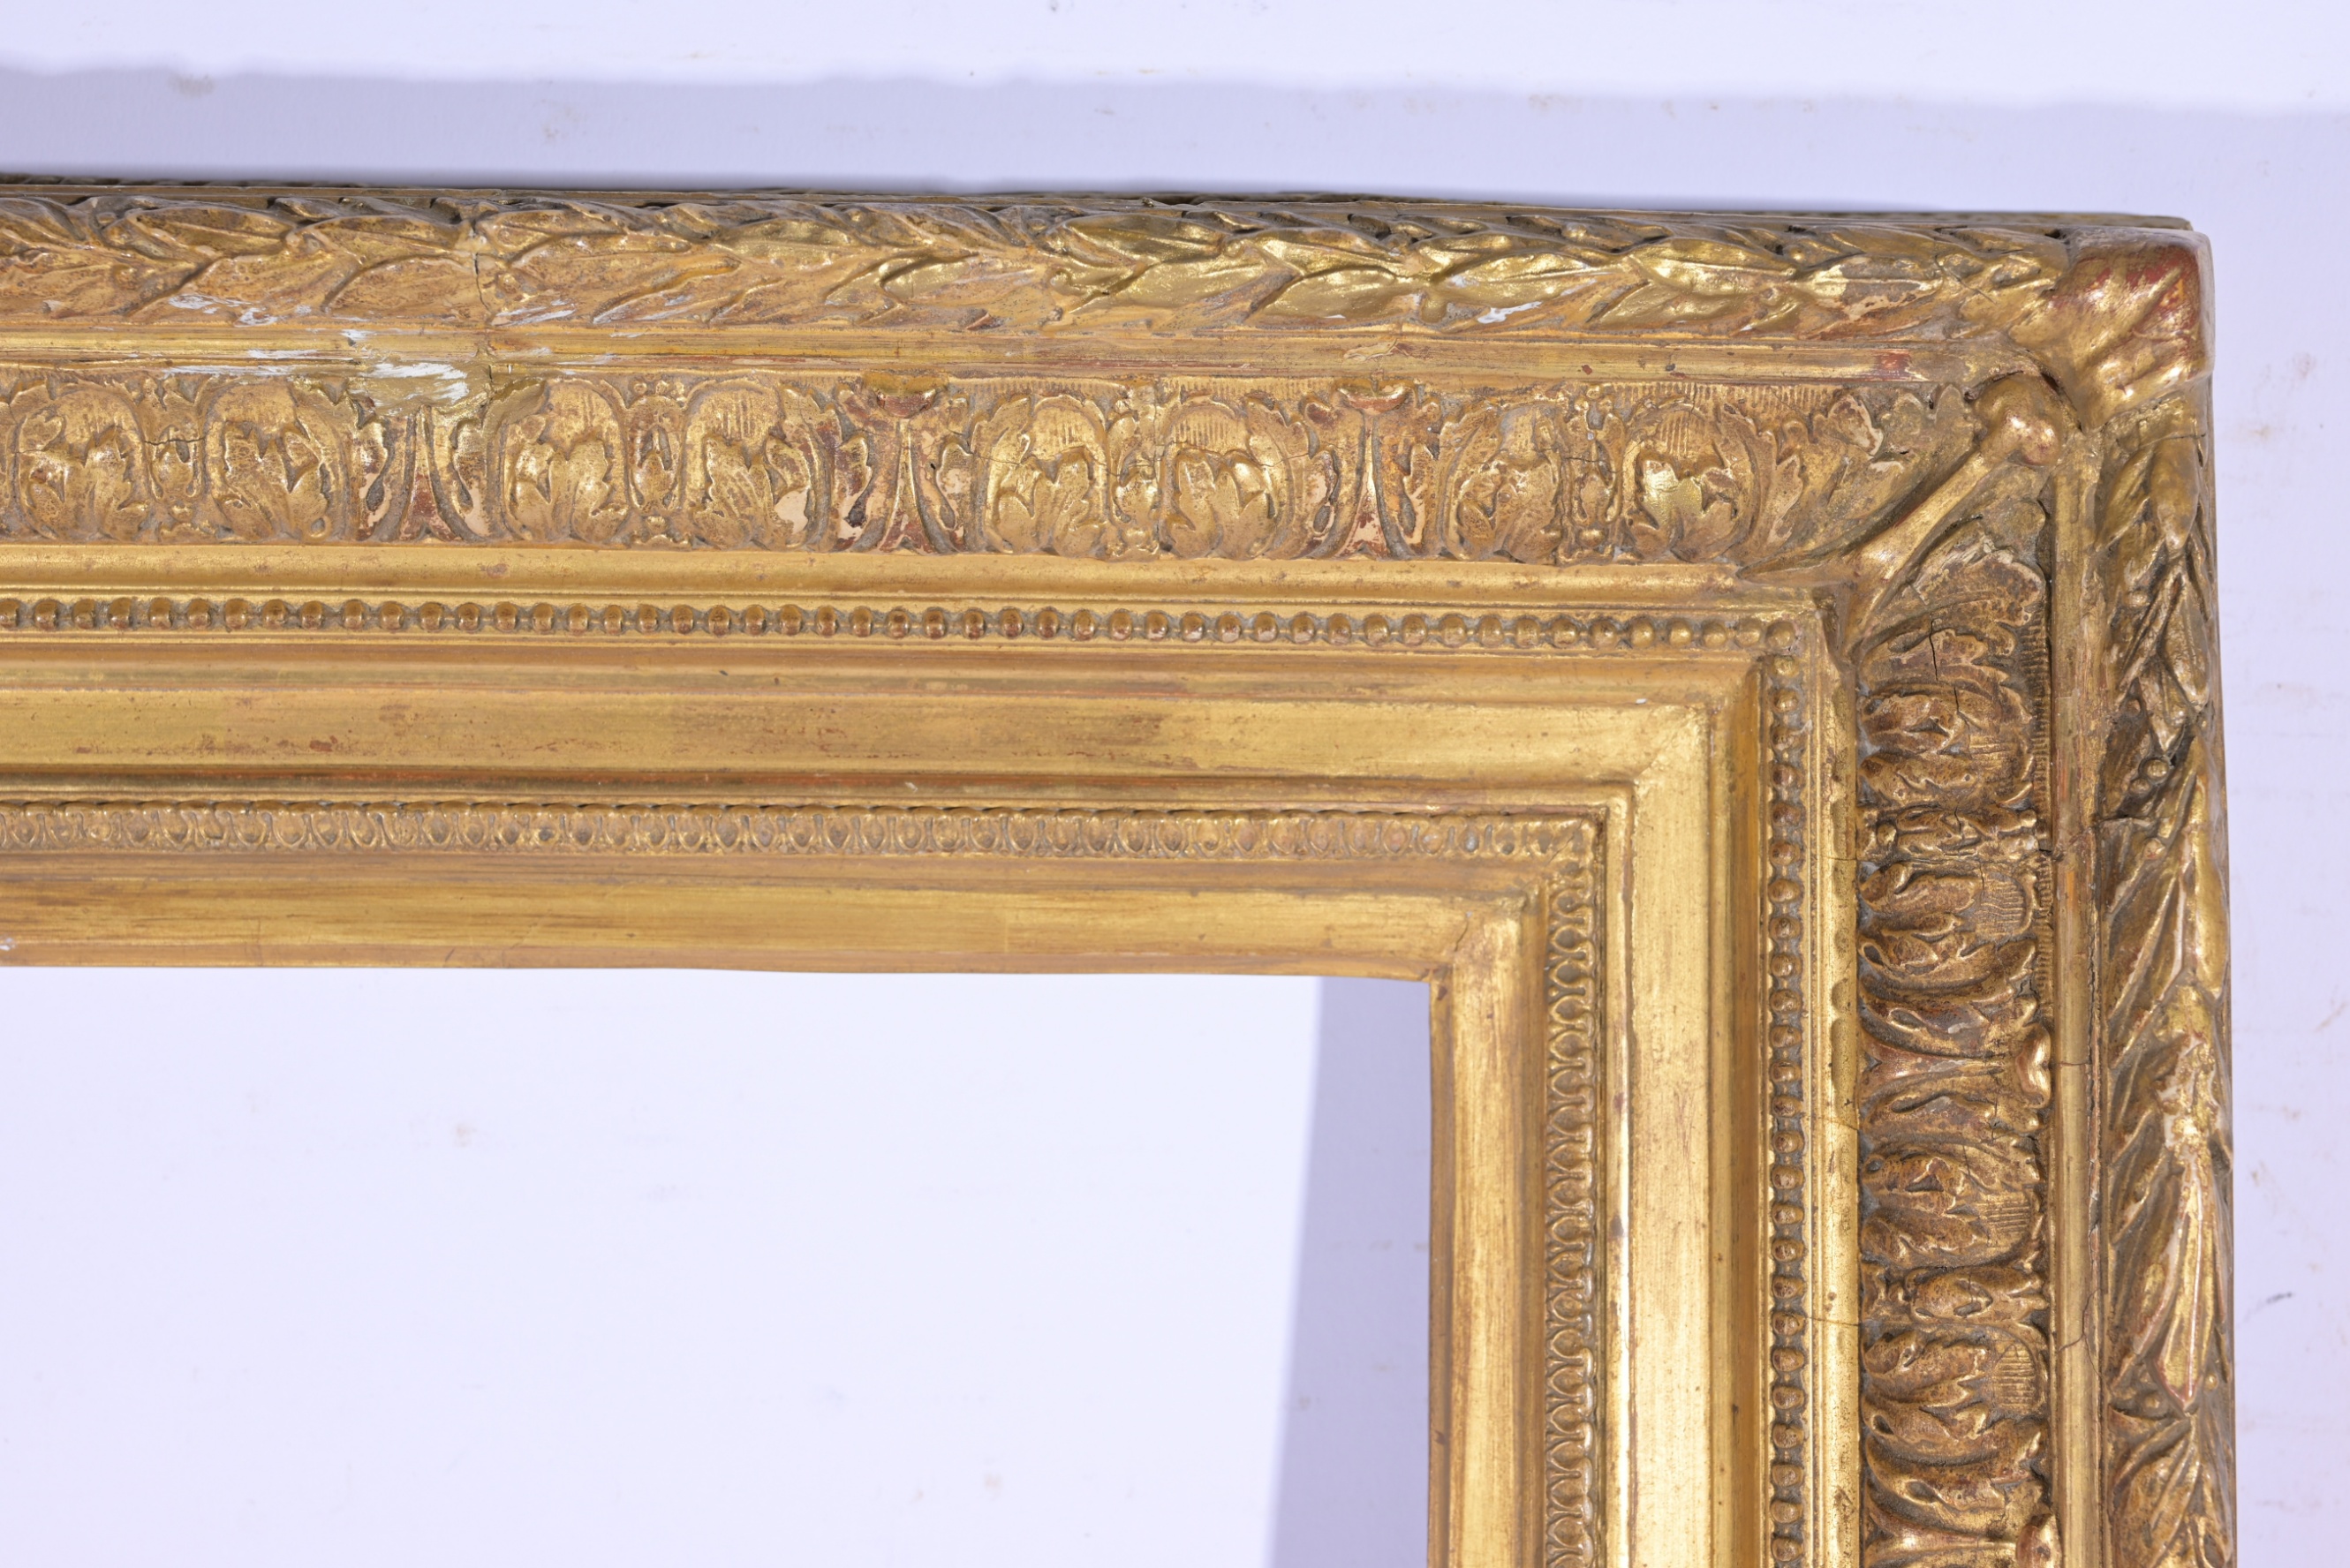 French,19th century Gilt Wood Frame - 28 x 18 - Image 4 of 9